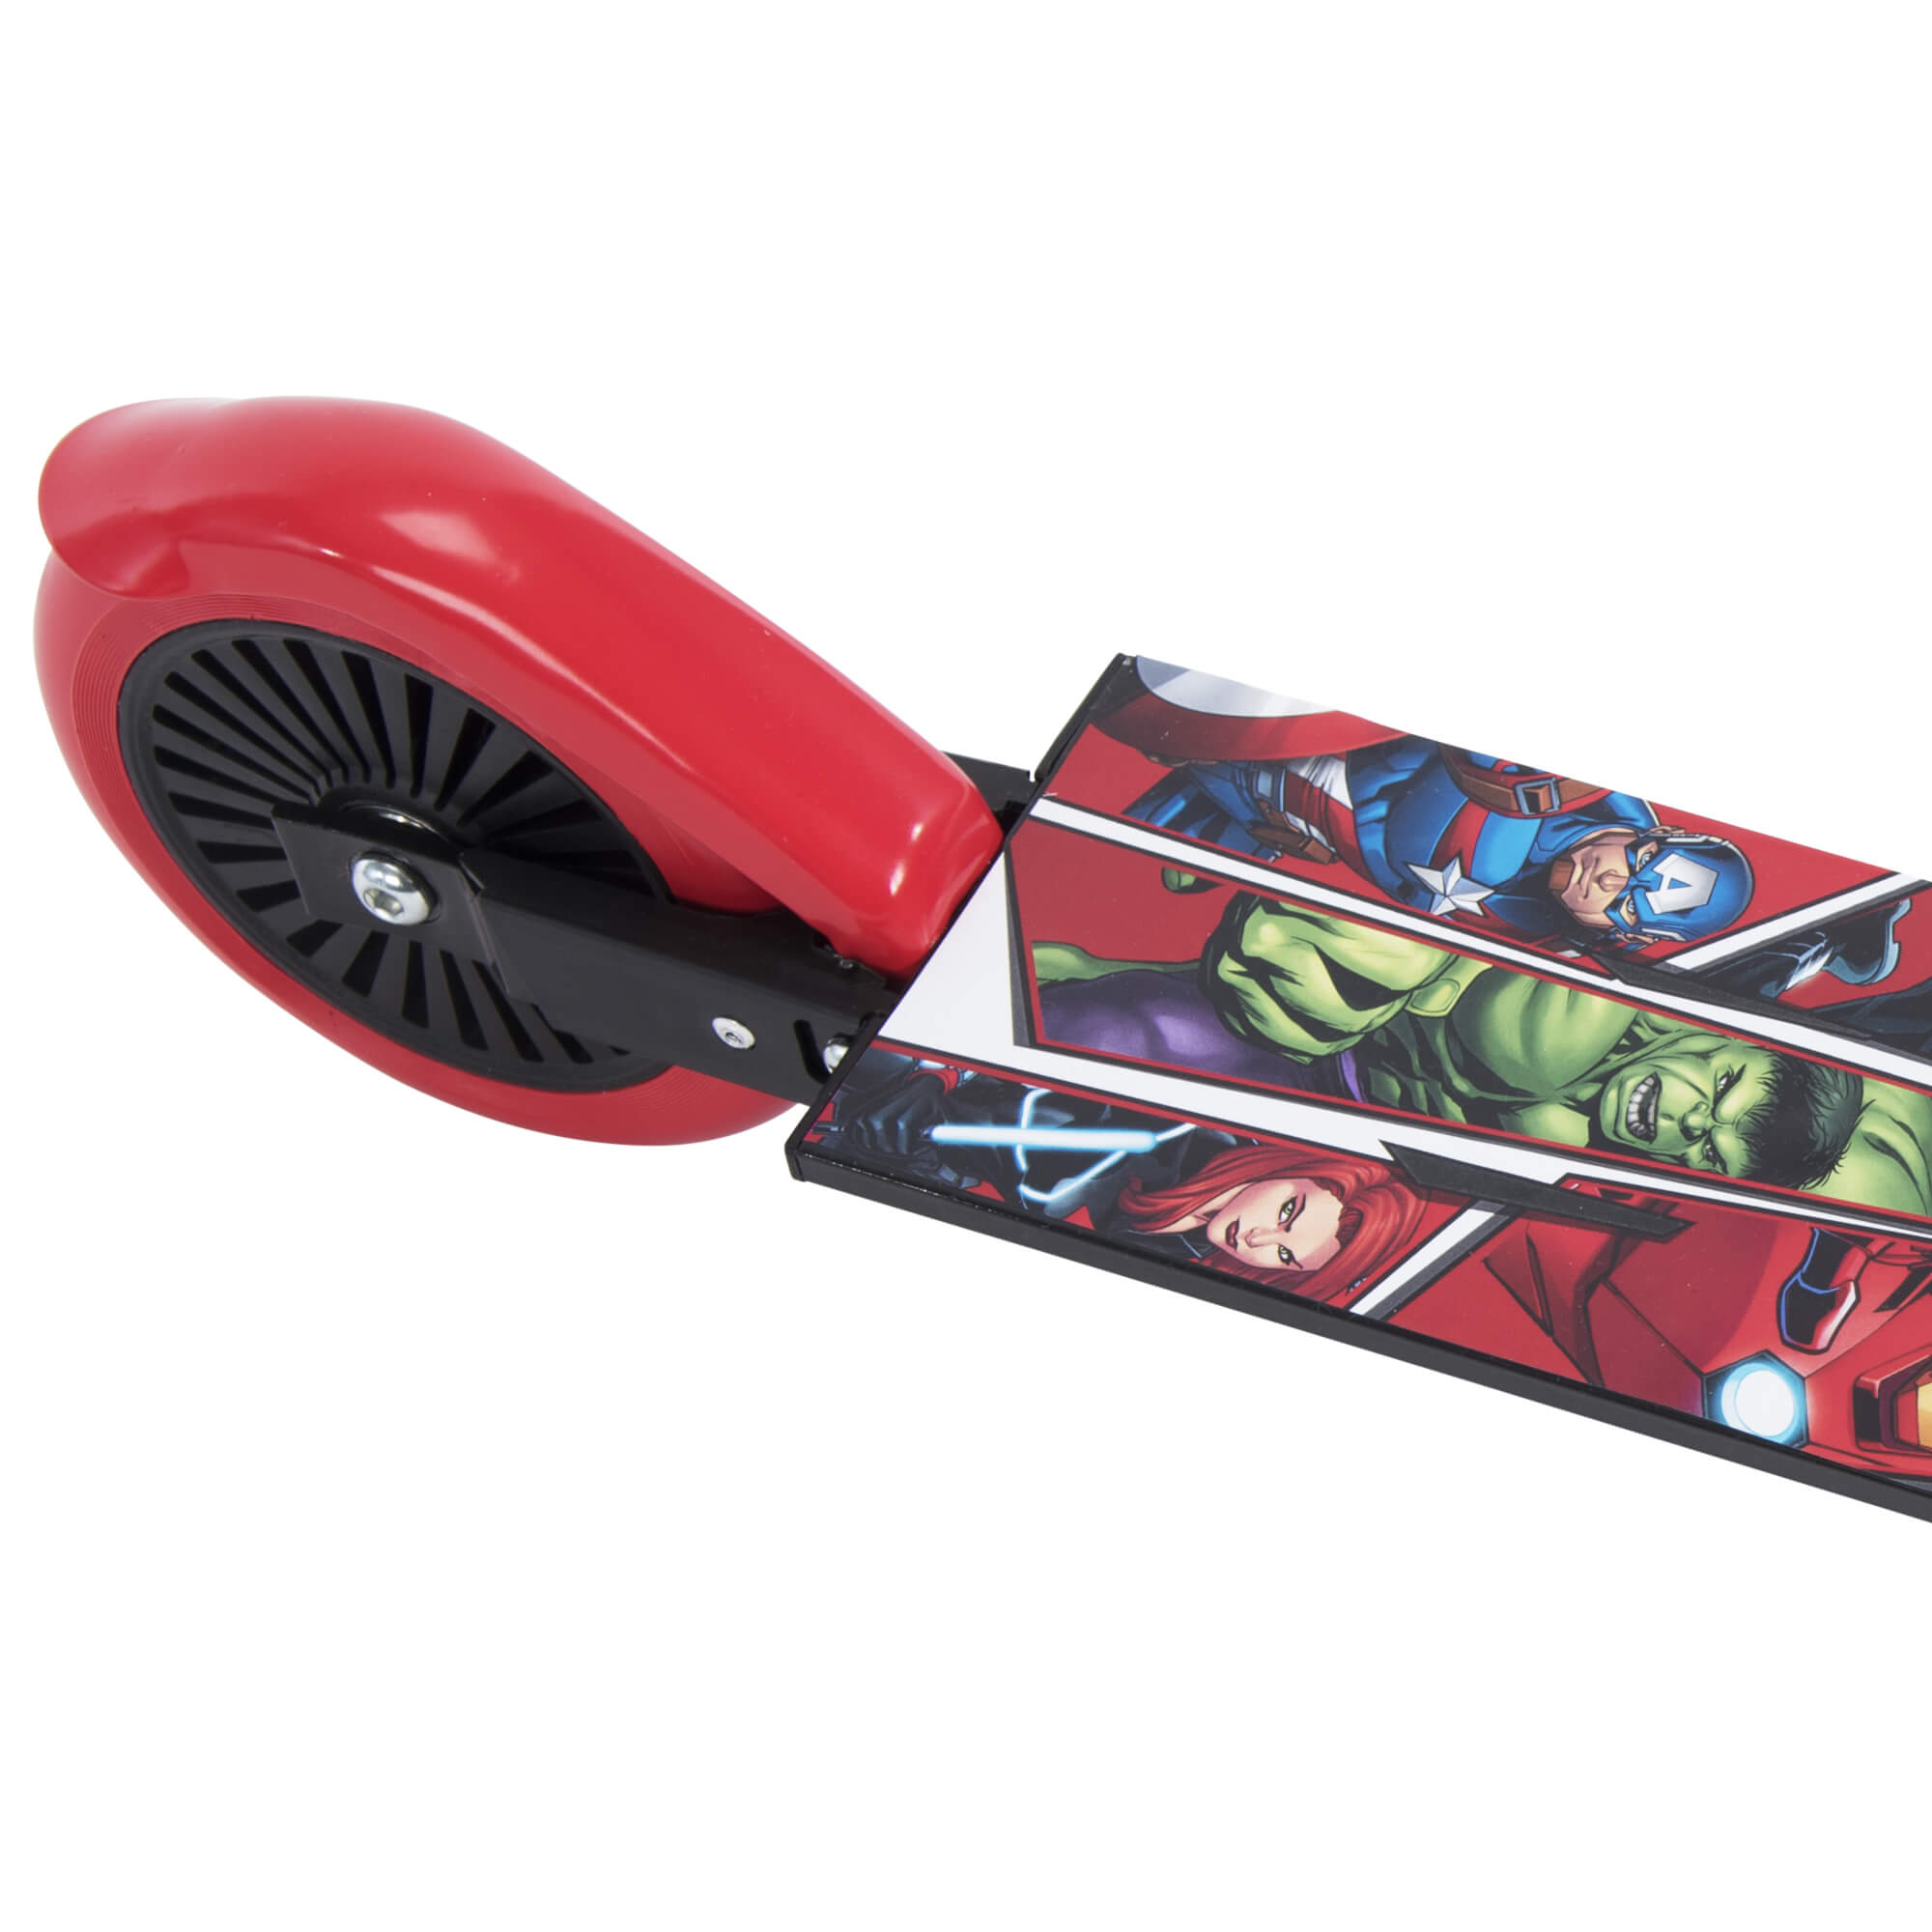 Marvel avengers Inline Folding Kick Scooter for Kids by Huffy - image 5 of 5